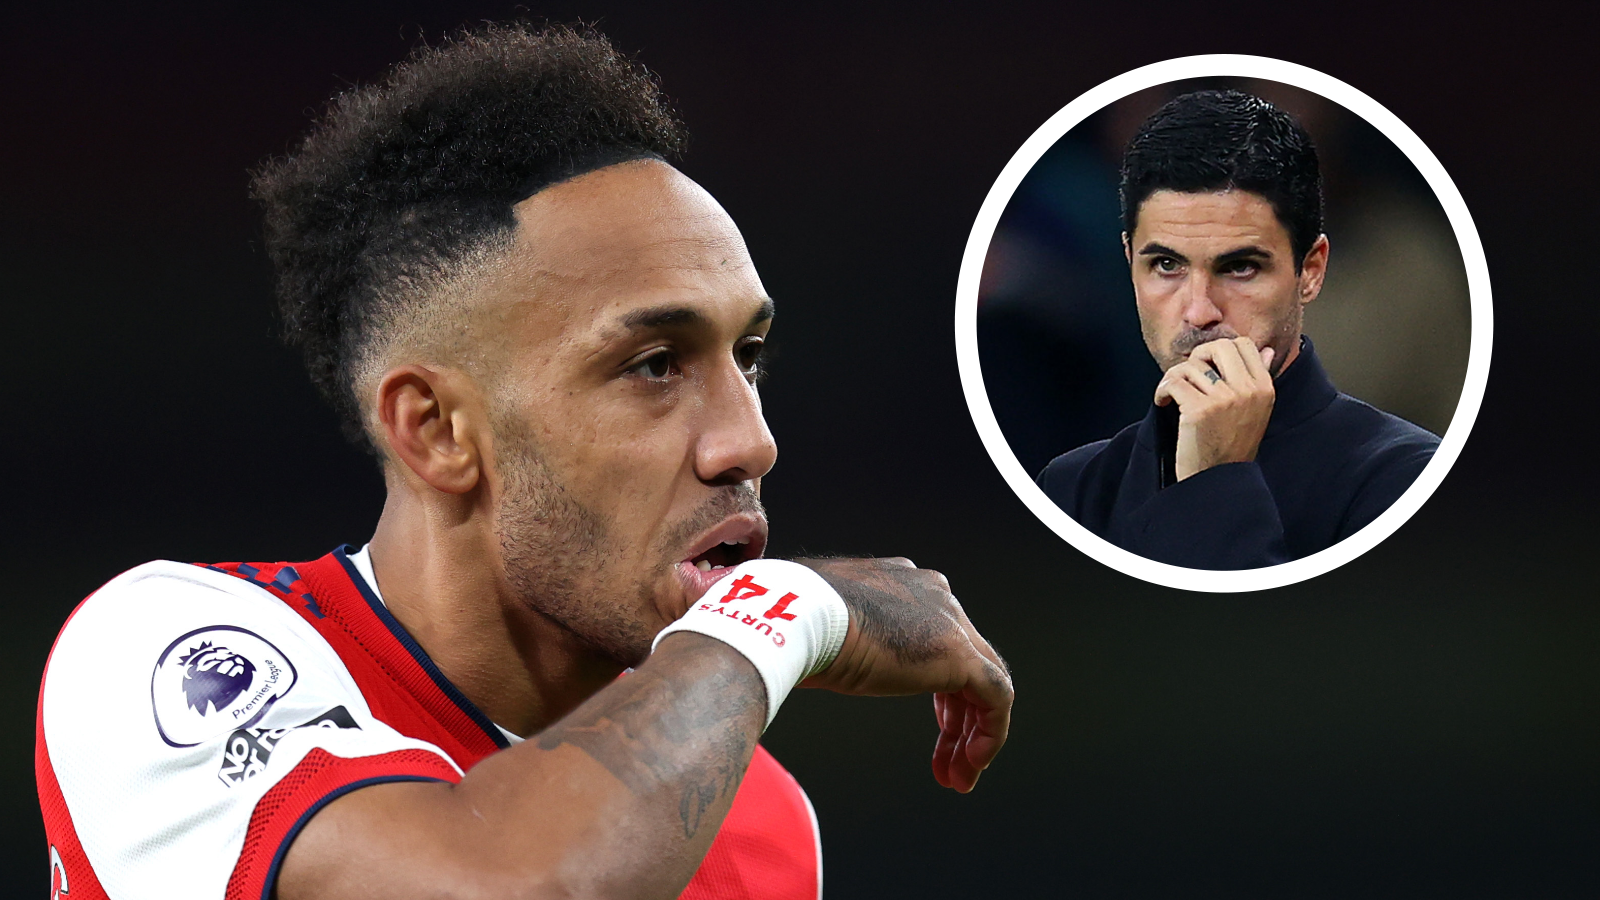 'The boss has balls' - Arsenal reactions to Arteta stripping Aubameyang of captaincy revealed in All or Nothing | Goal.com India